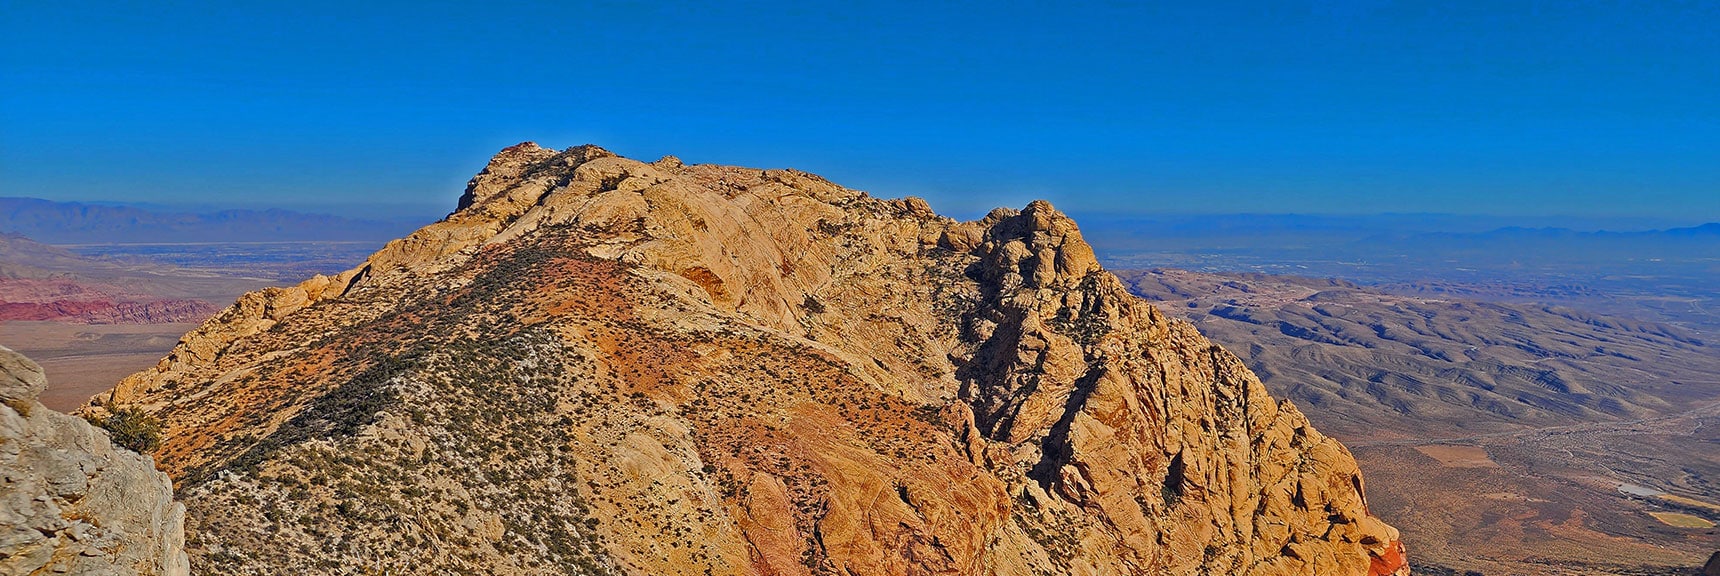 First View of Mt. Wilson from Ridgeline. Only 200ft Lower Than Summit. | Rainbow Mountains Mid Upper Crest Ridgeline from Lovell Canyon, Nevada